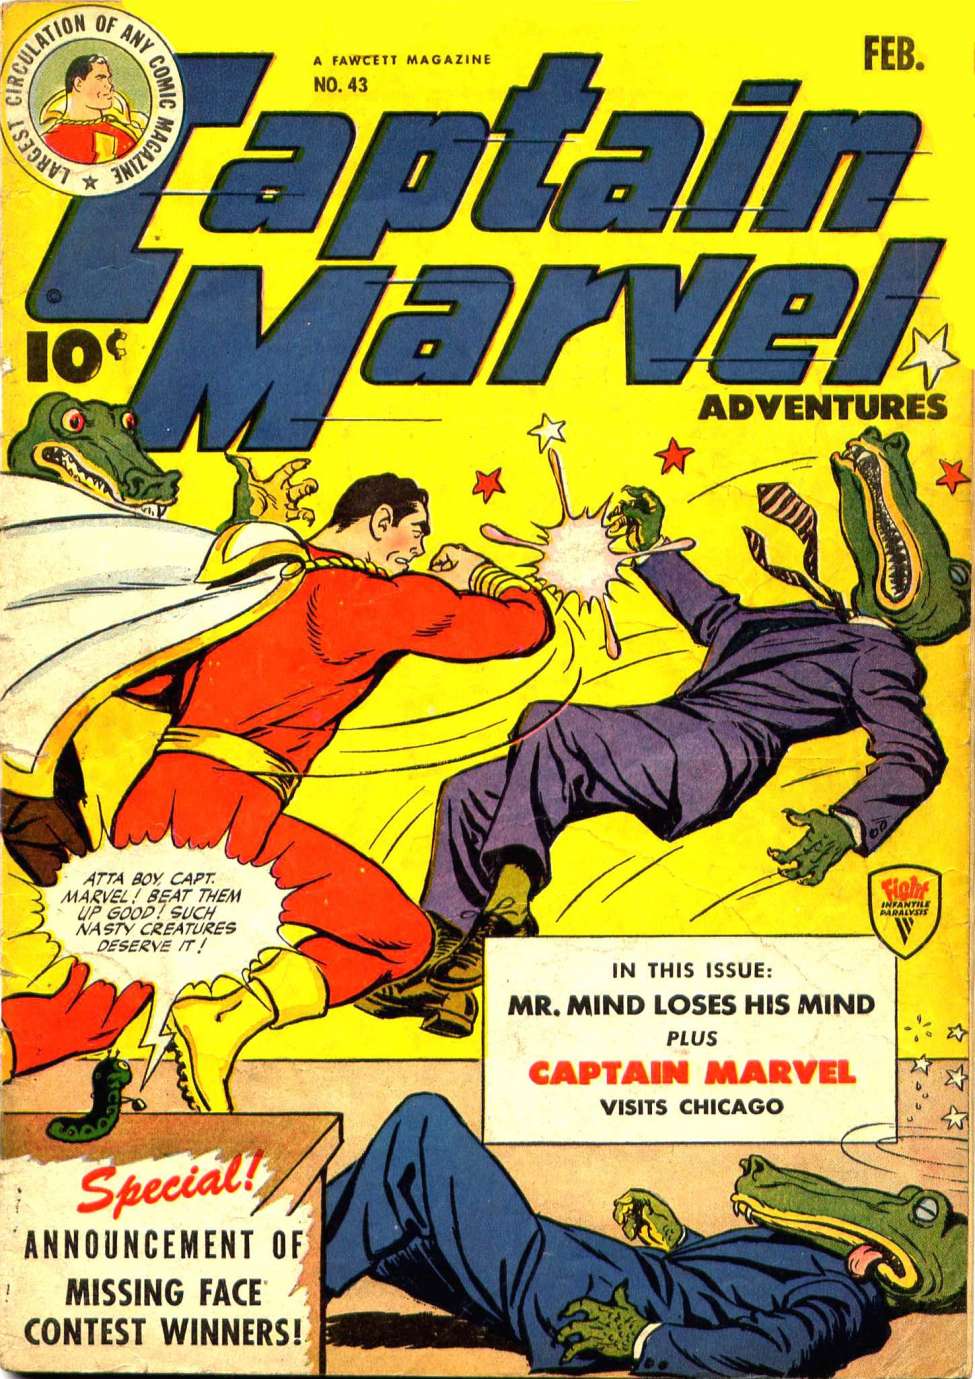 Book Cover For Captain Marvel Adventures 43